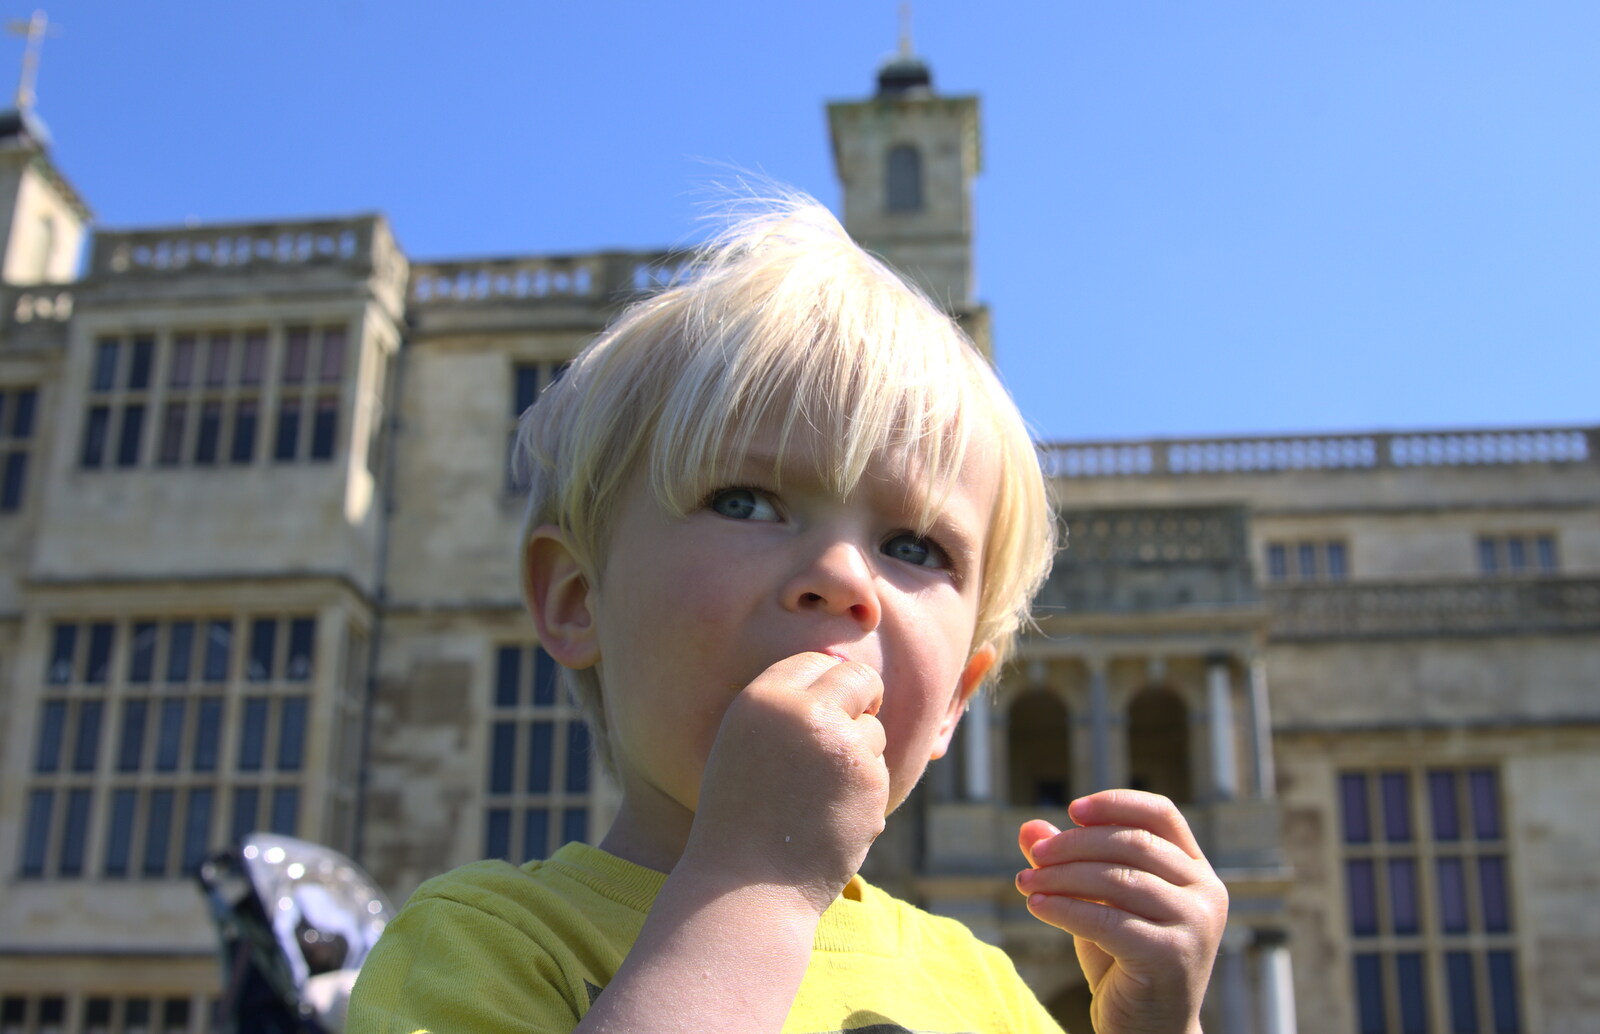 Gabes eats someting from A Trip to Audley End House, Saffron Walden, Essex - 16th April 2014